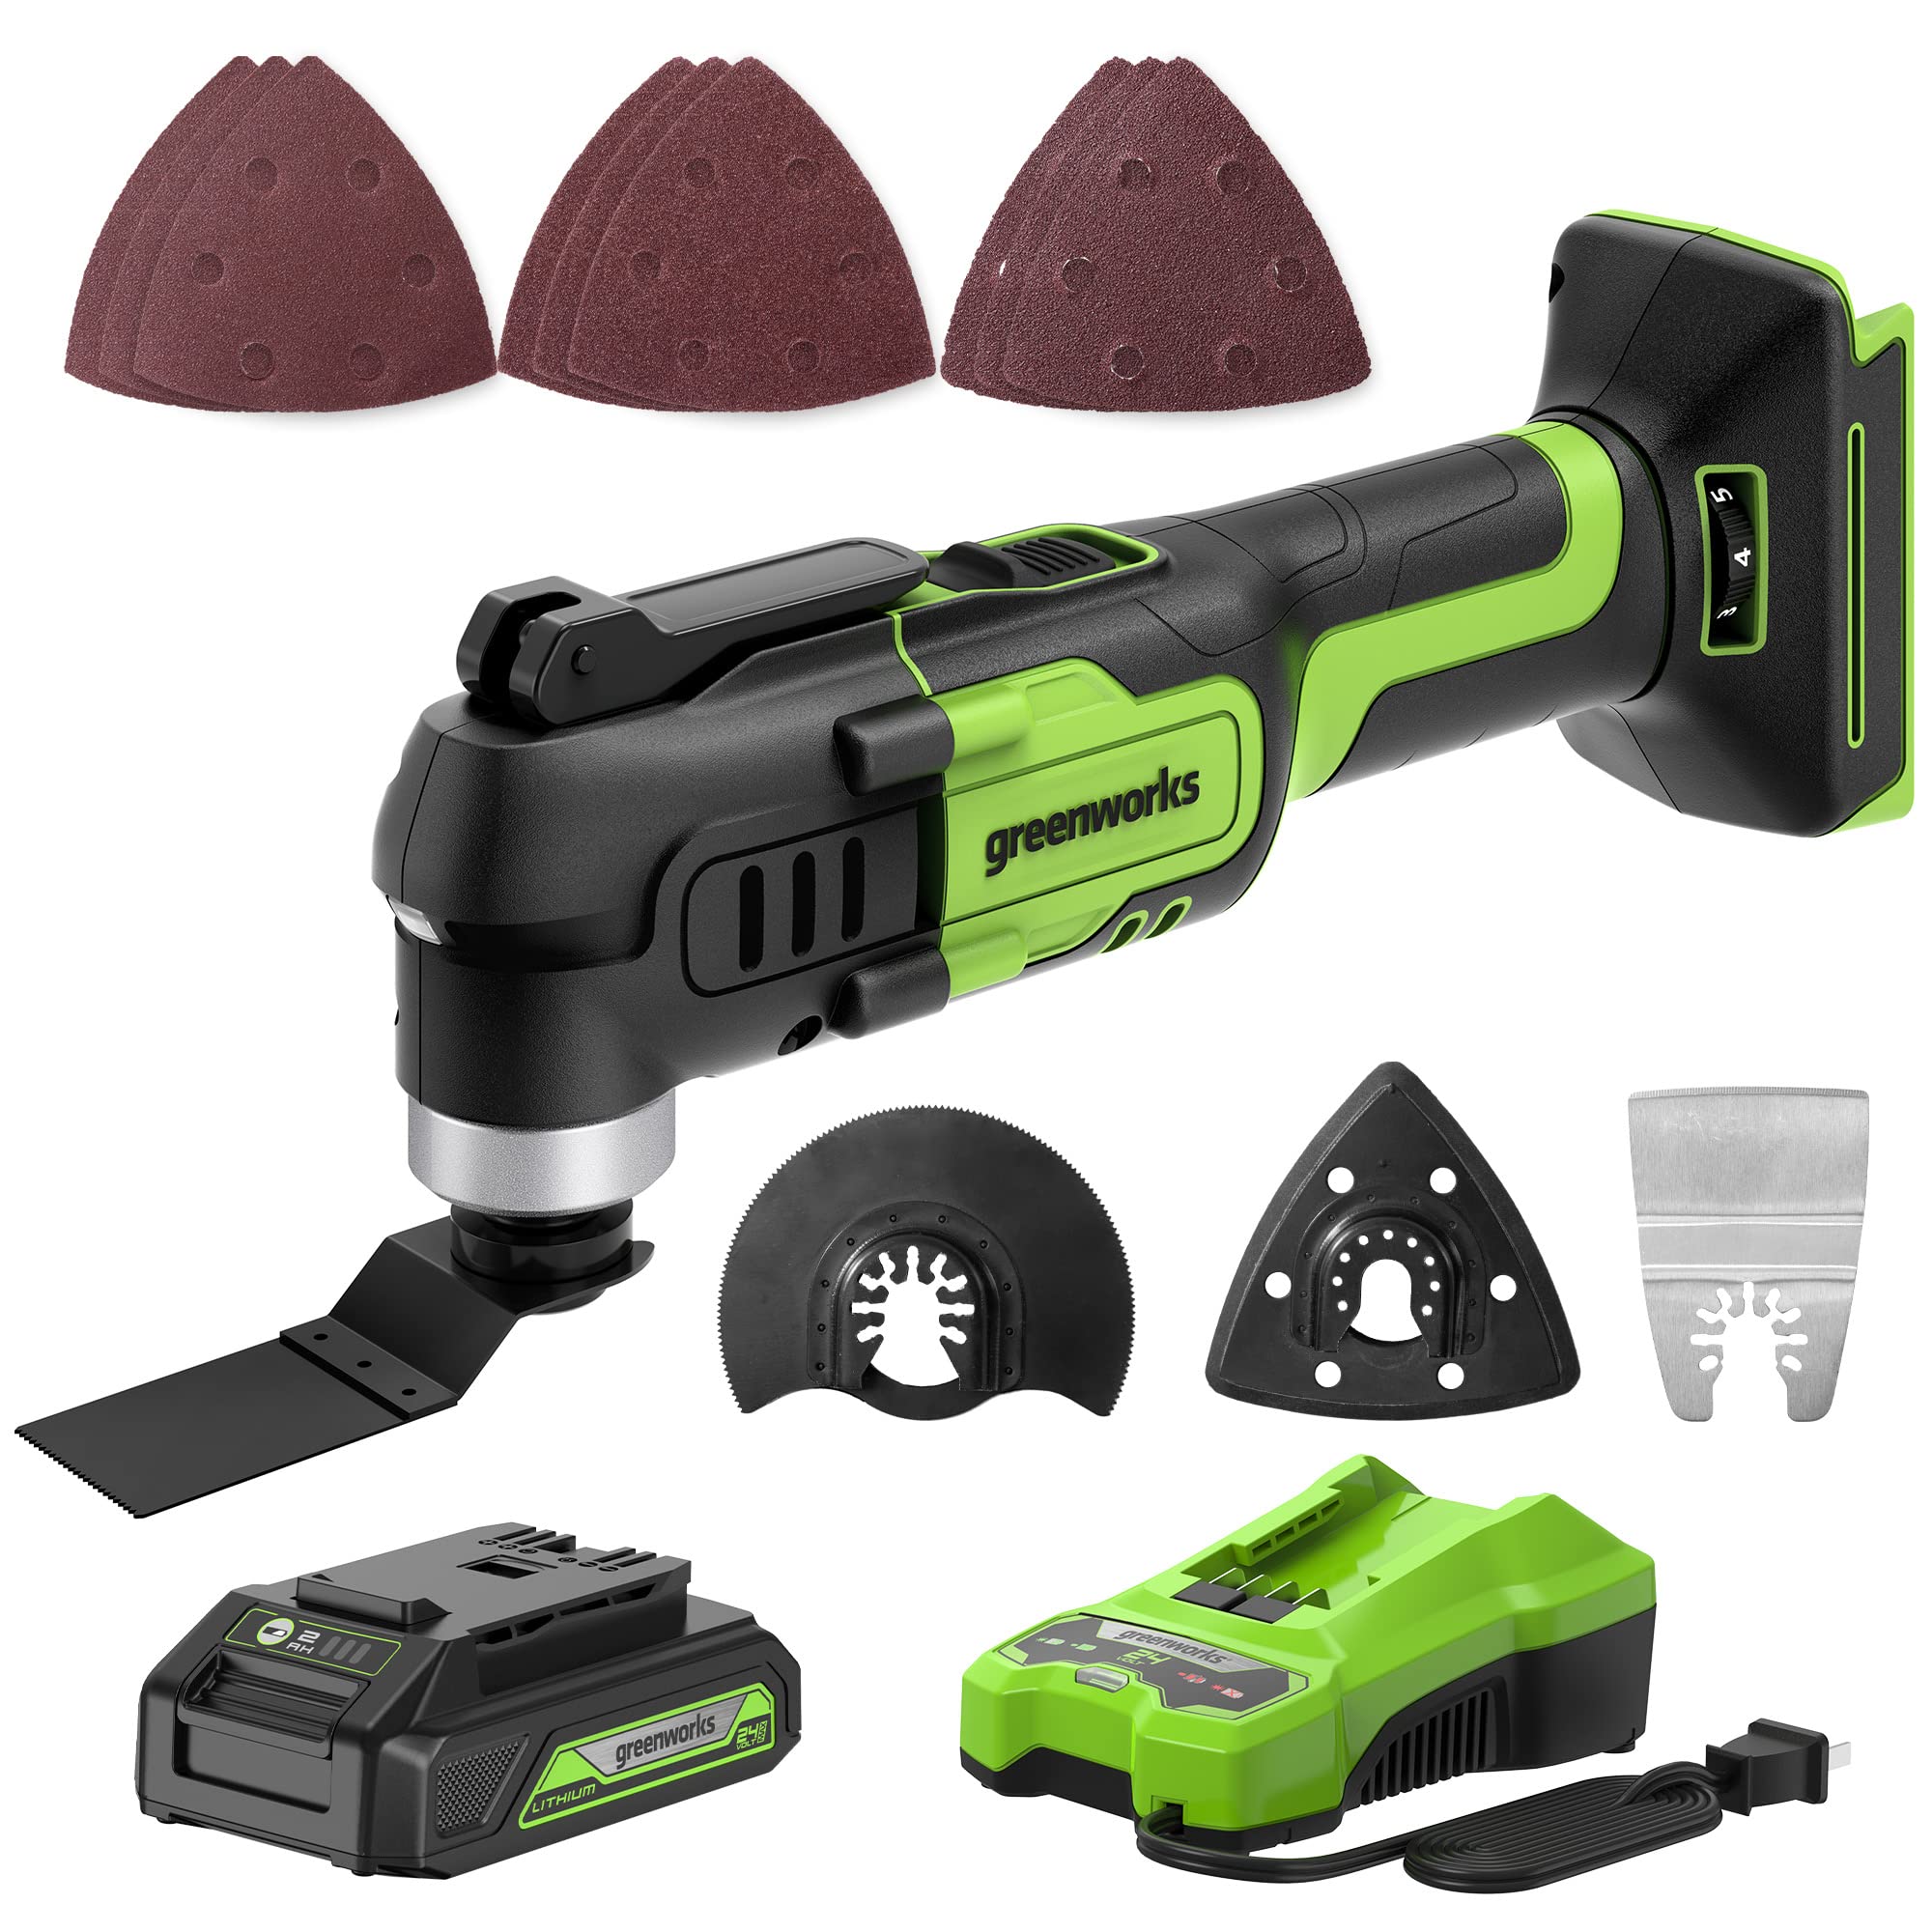 Greenworks 24V Cordless Multi-Tool 13 Accessories 2.0Ah Battery and Charger Included並行輸入品